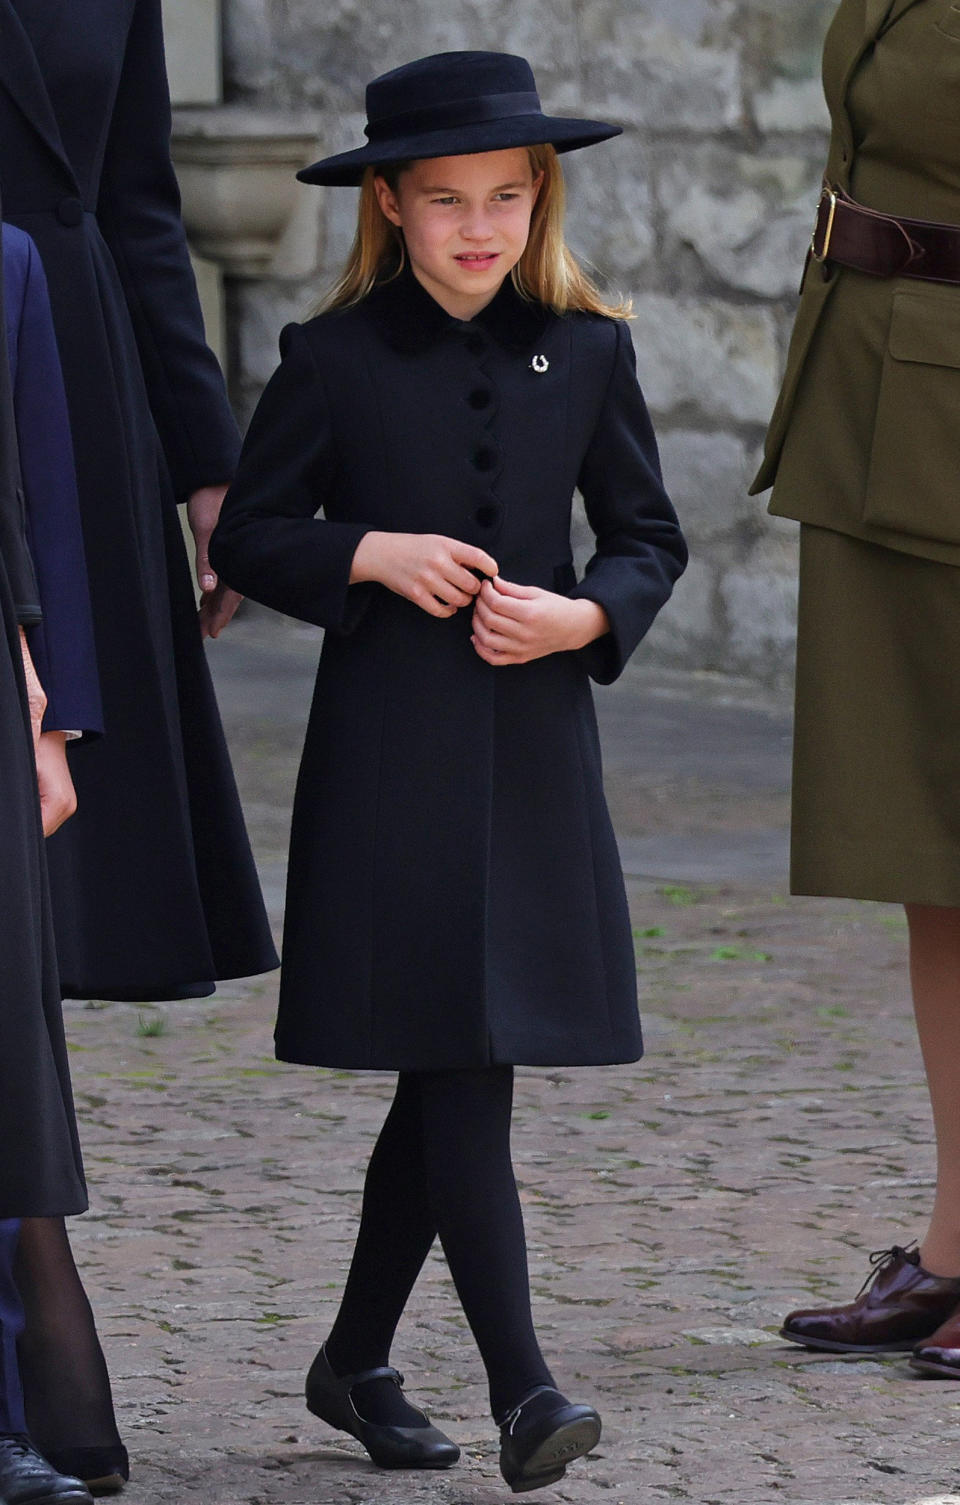 Princess Charlotte leaving Westminster Abbey, the site of Queen Elizabeth's funeral (Chris Jackson / Getty Images)